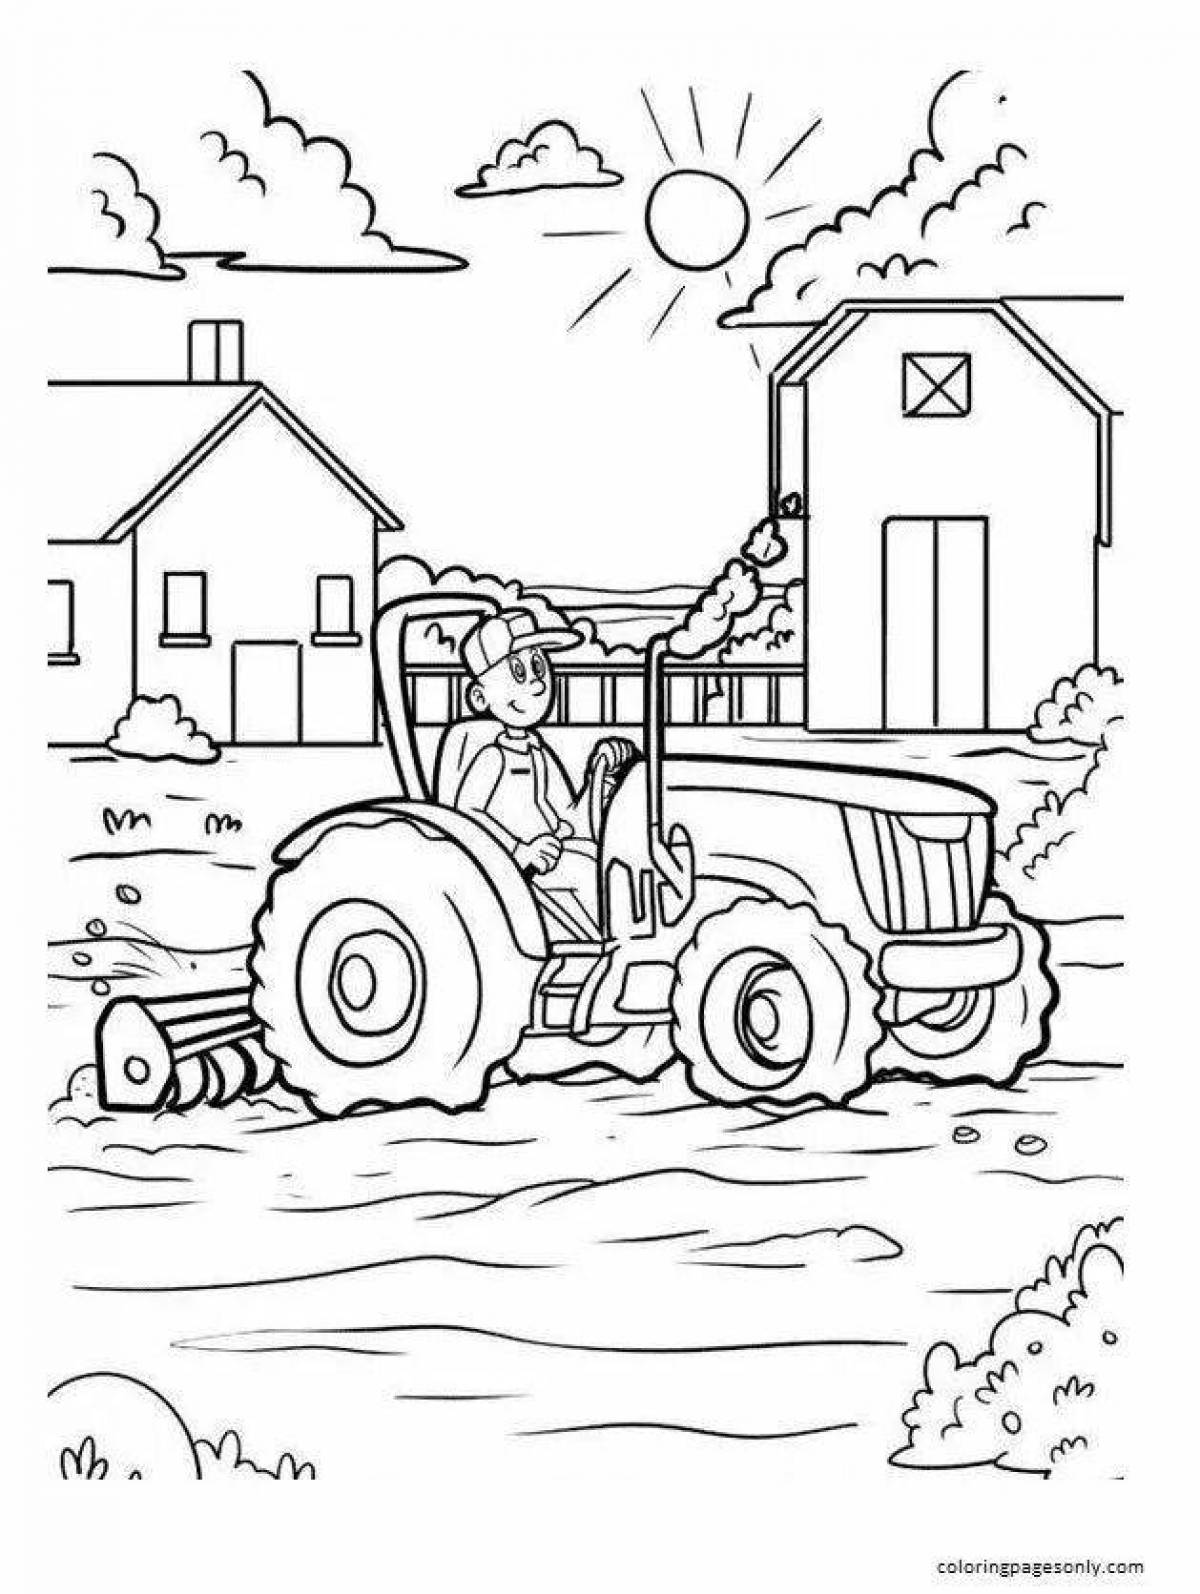 Coloring page cute tractor driver